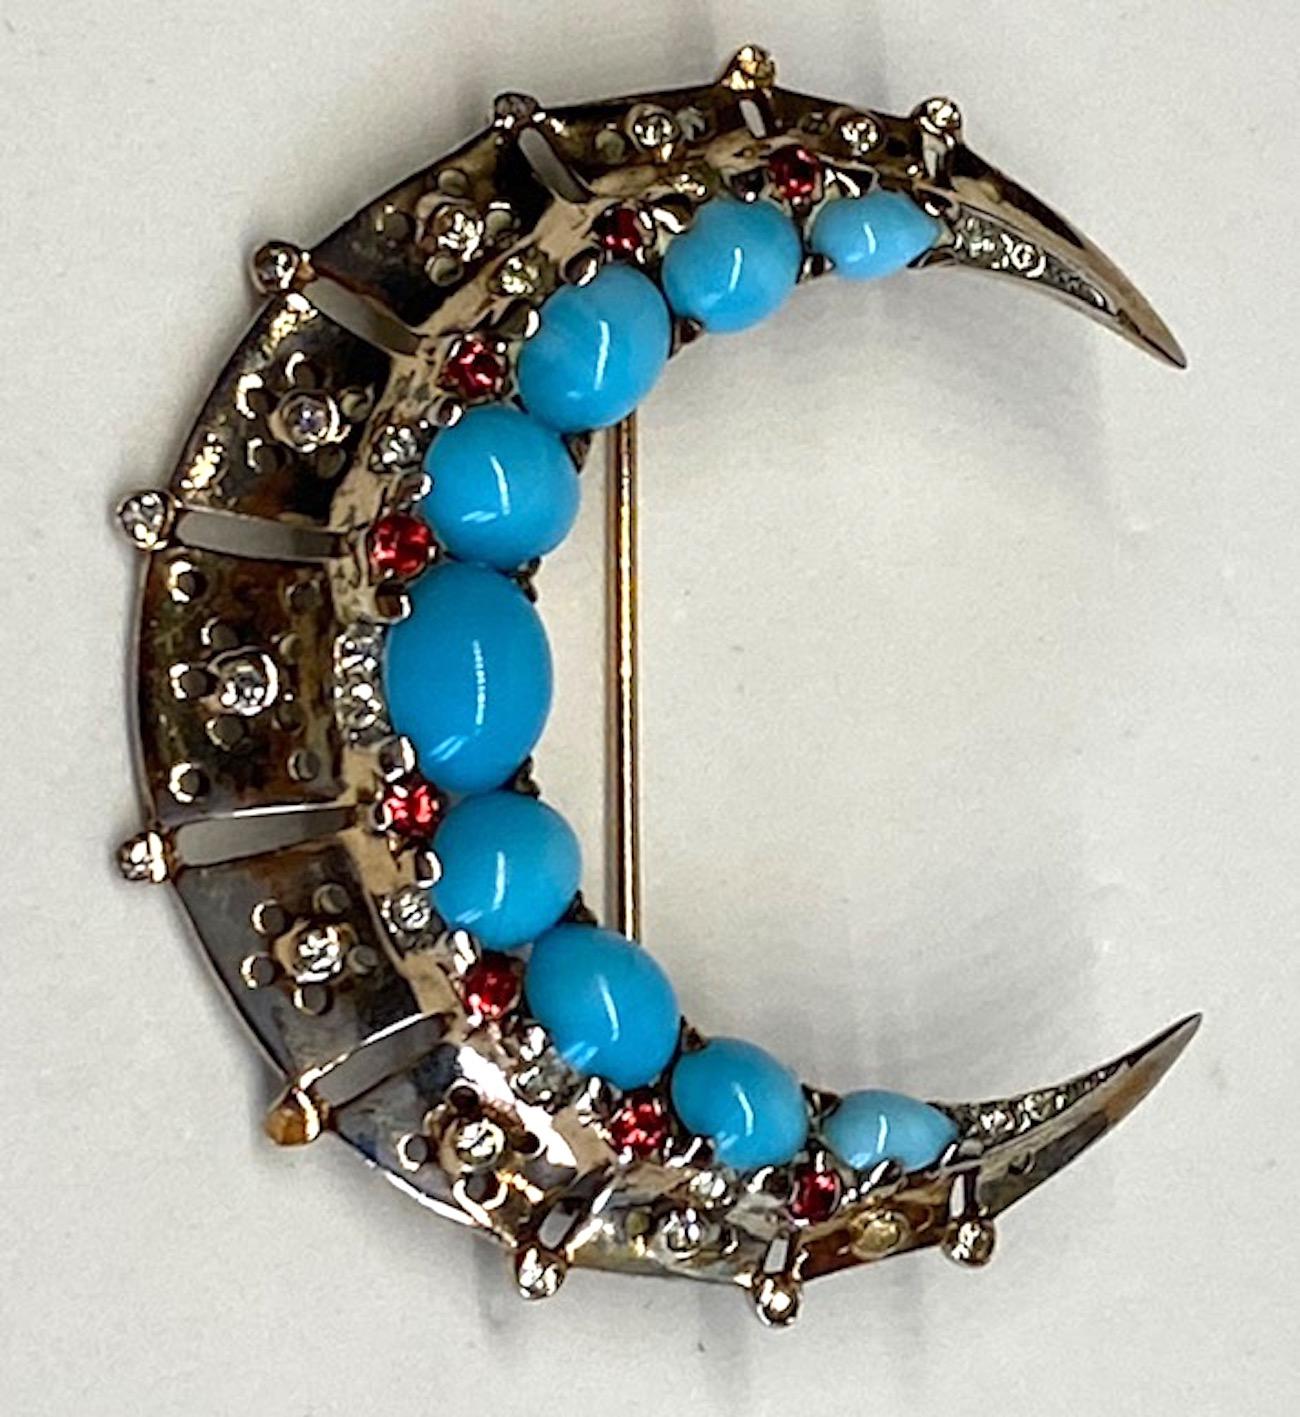 A very nice older Trifari sterling silver with glass turquoise cabochon and red rhinestone accent crescent brooch. Designed by Alfred Philippe, head designer for Trifari, and patented in 1948. Signed Trifari with crown over the T and sterling on the